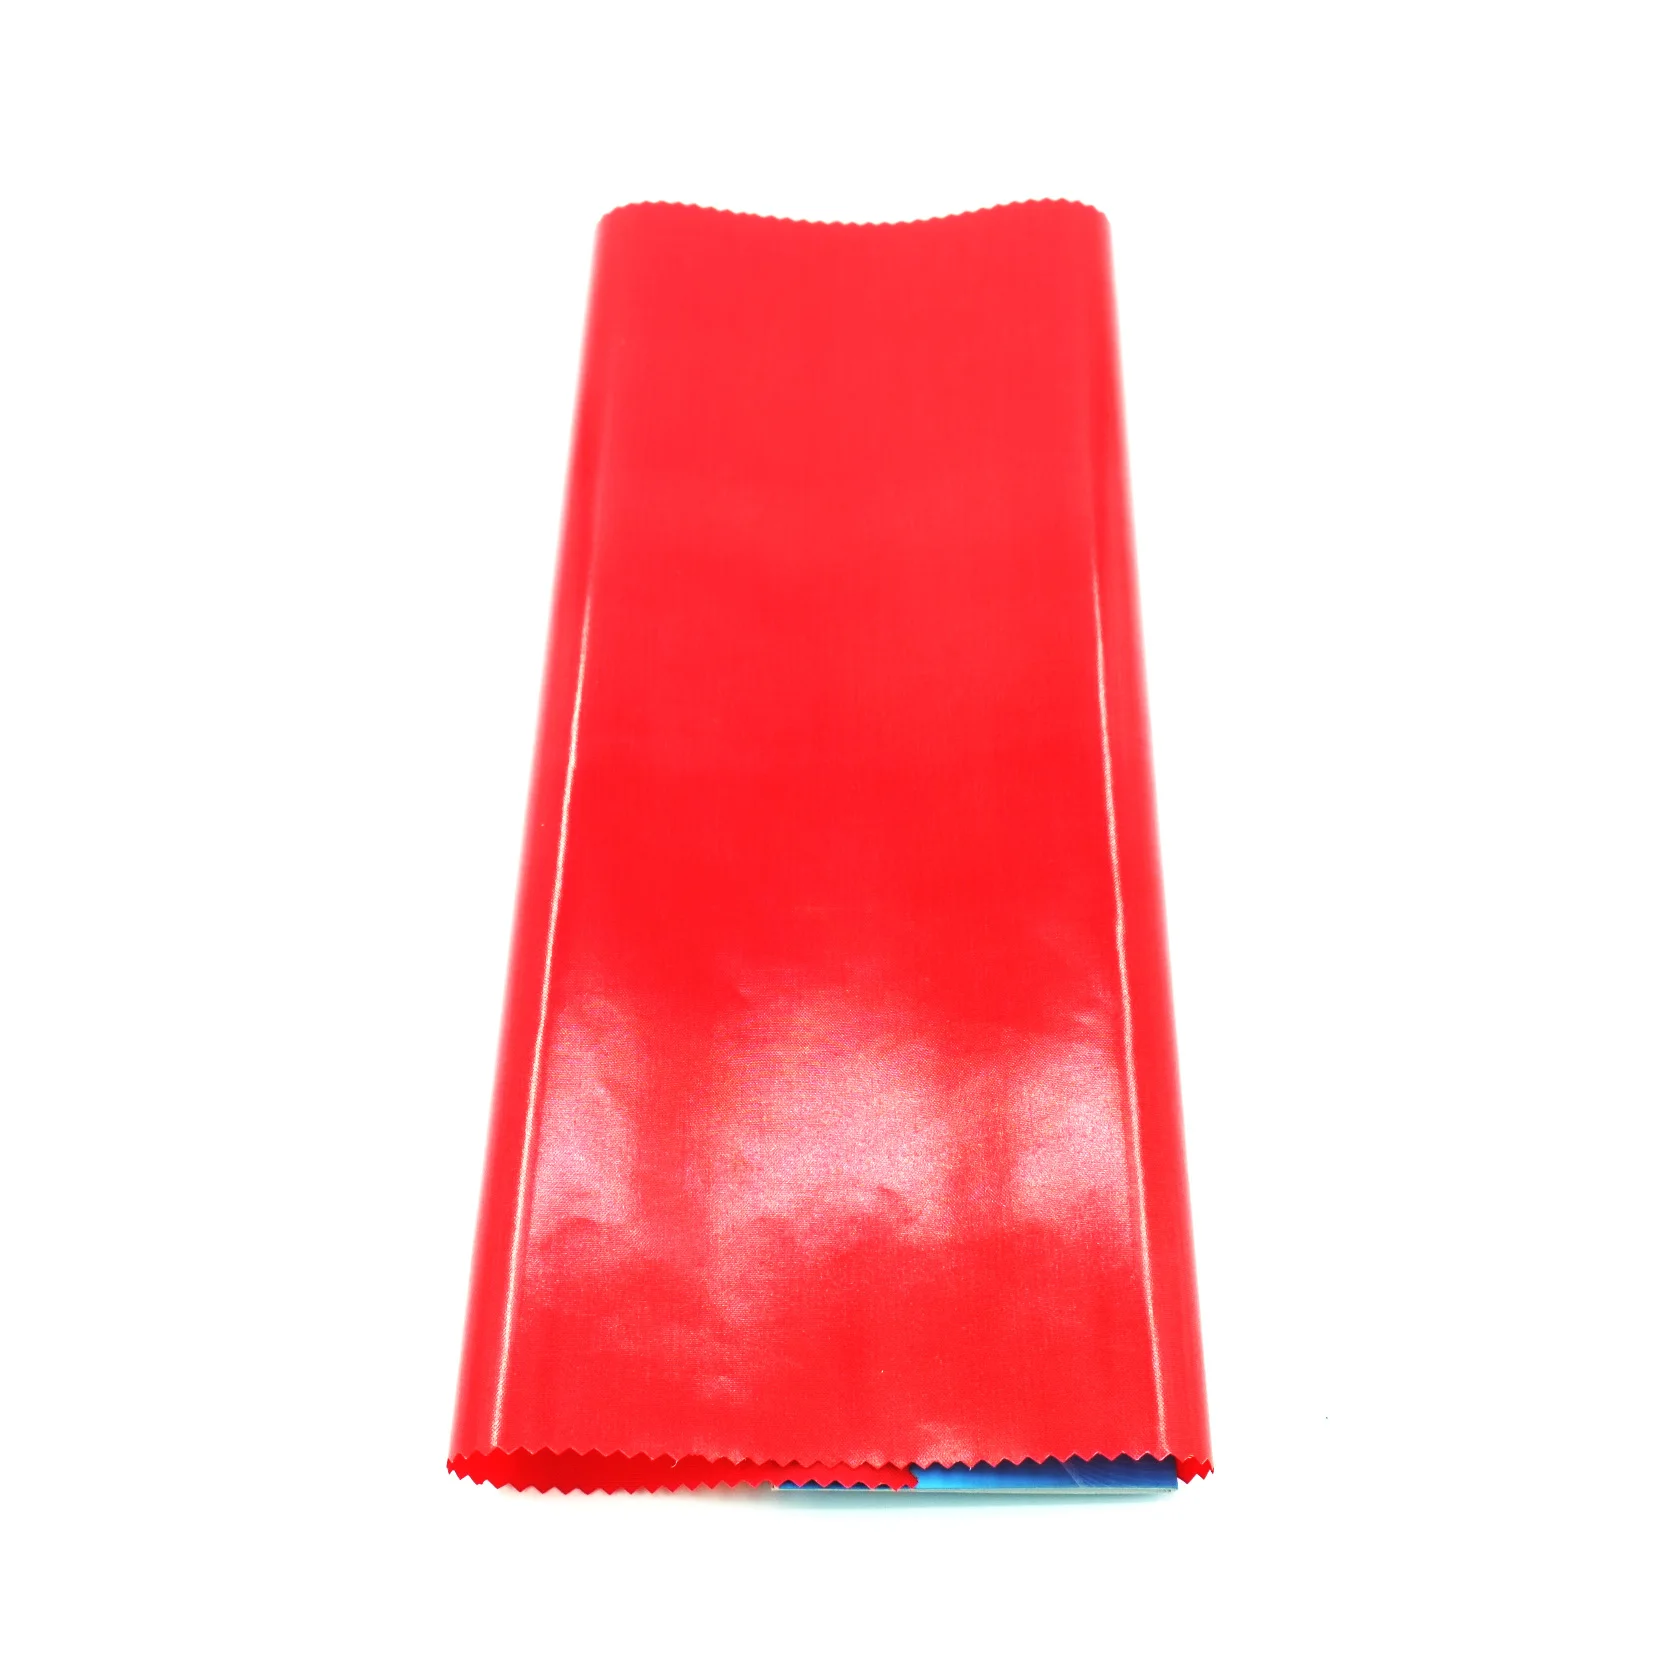 
Nylon 66 with TPU coating for inflatable boat fabric 